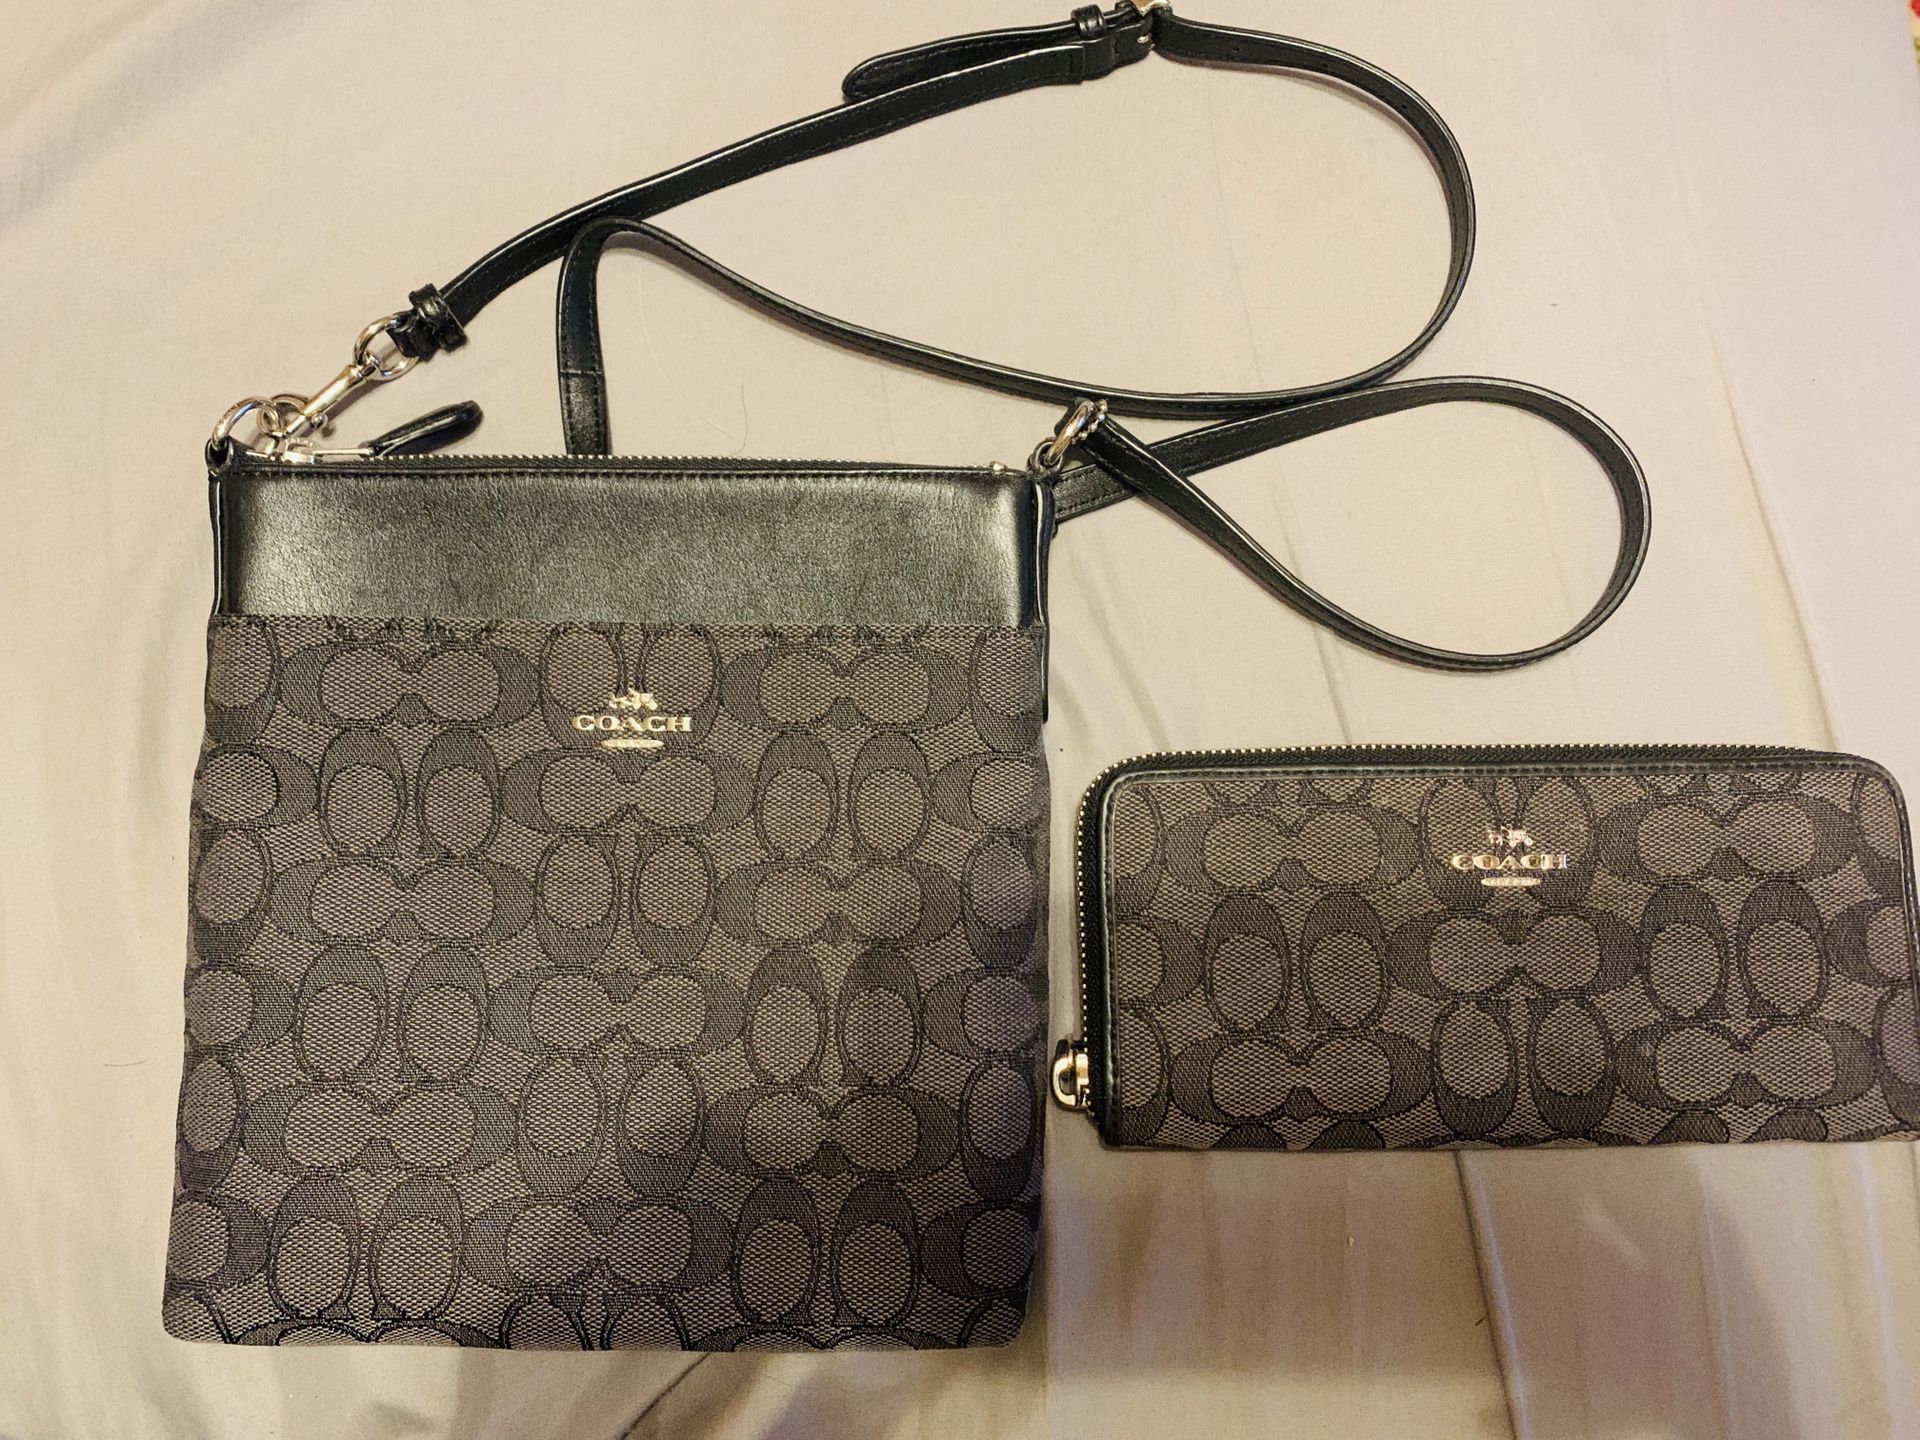 Coach purse and matching wallet